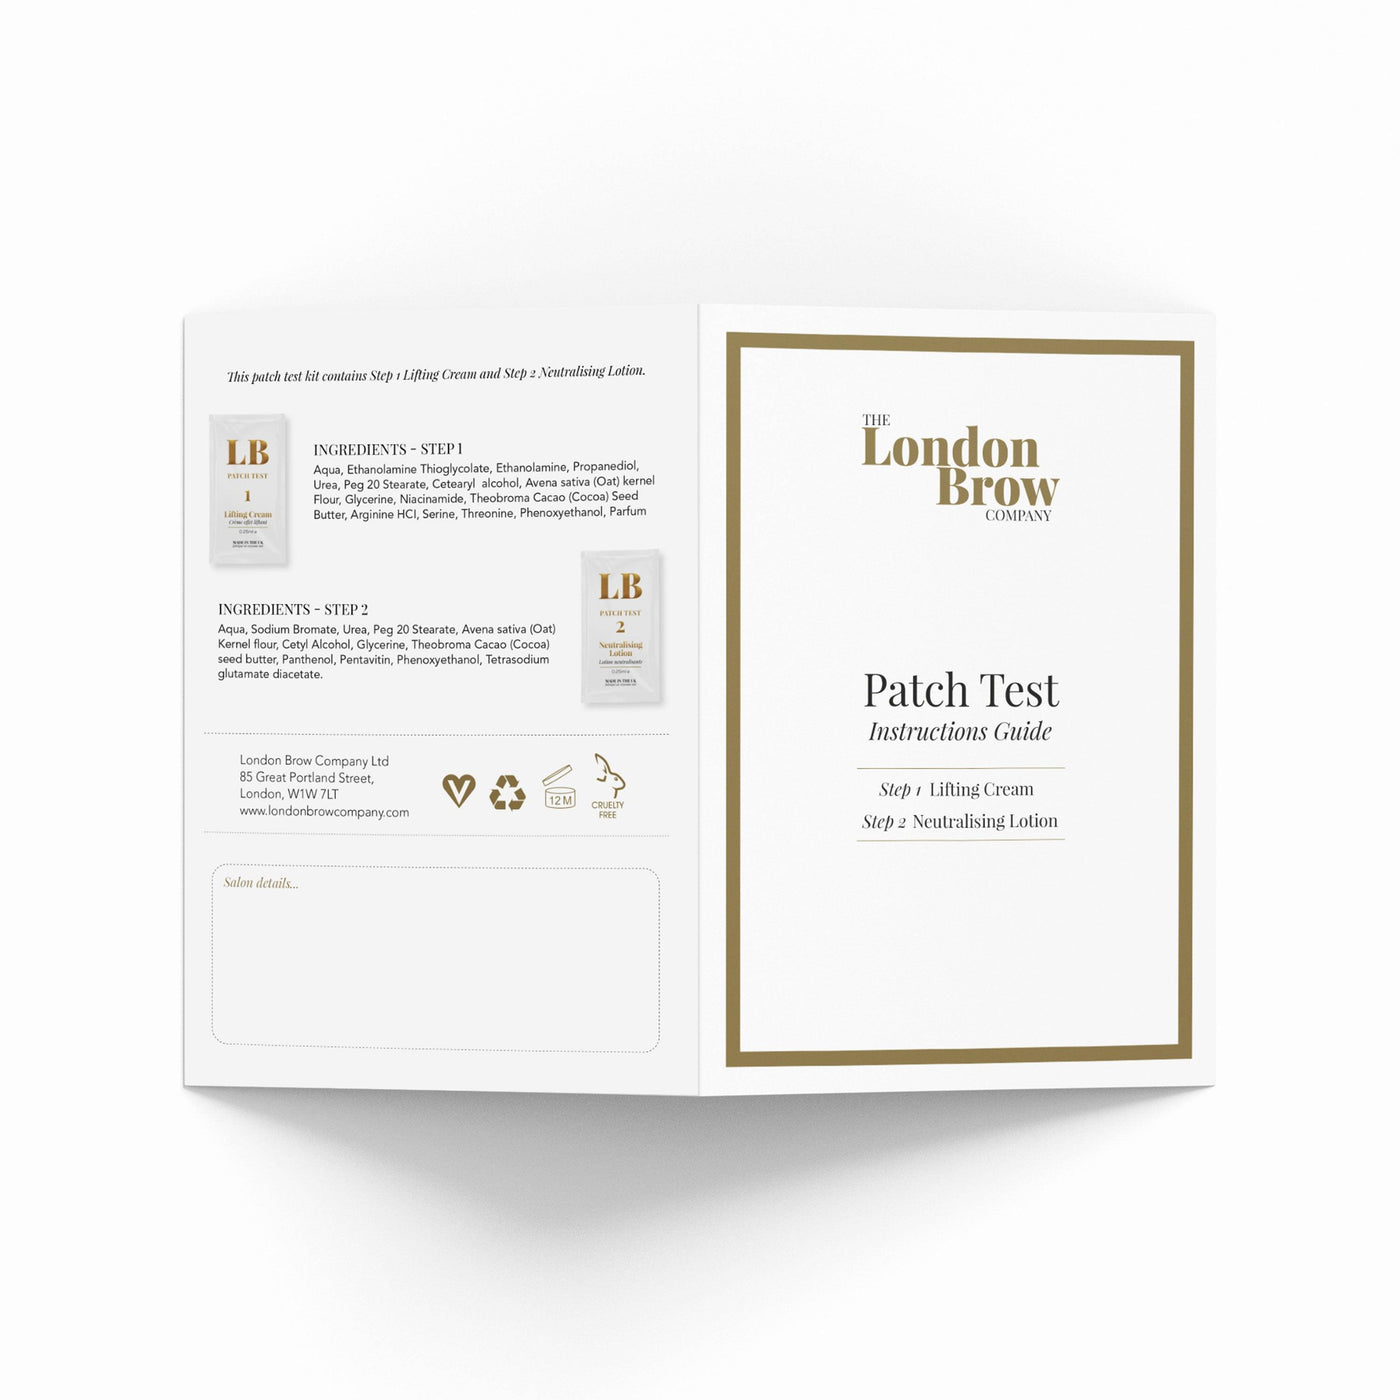 London Brow - Patch Test Sachets with Client Patch Test Cards - The London Brow Company